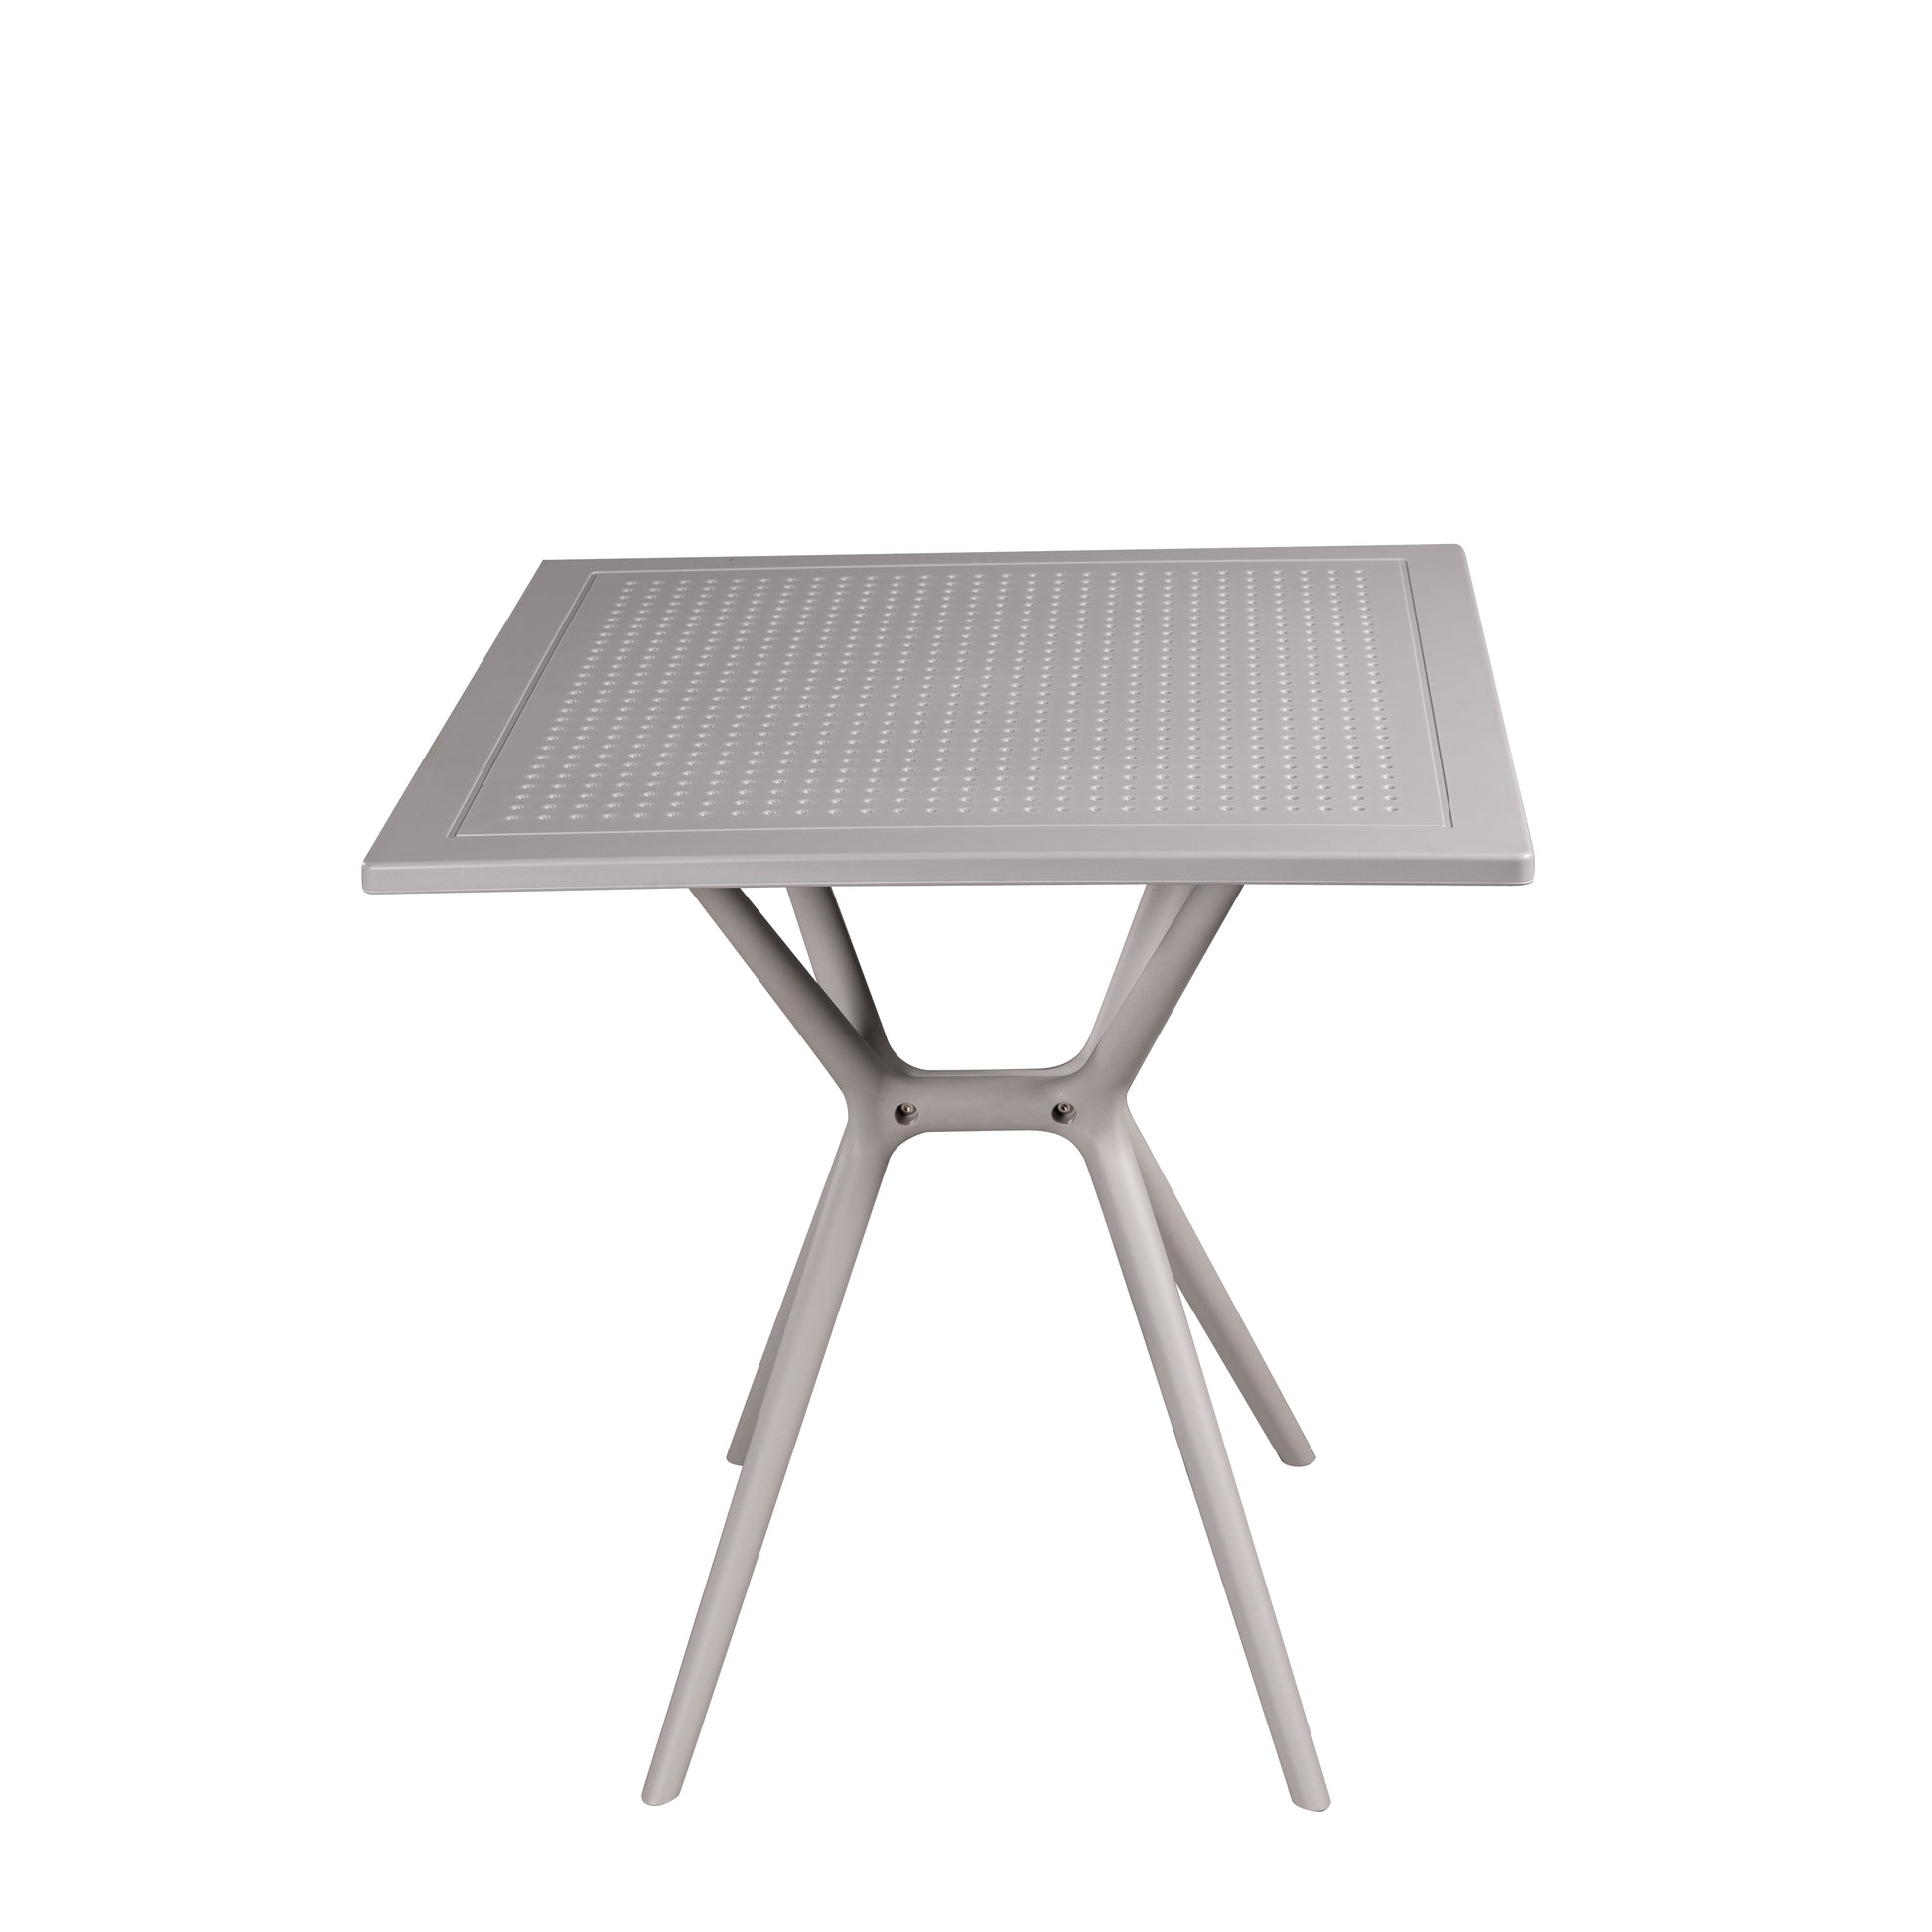 Urban Square Table Cafe Tables - makemychairs